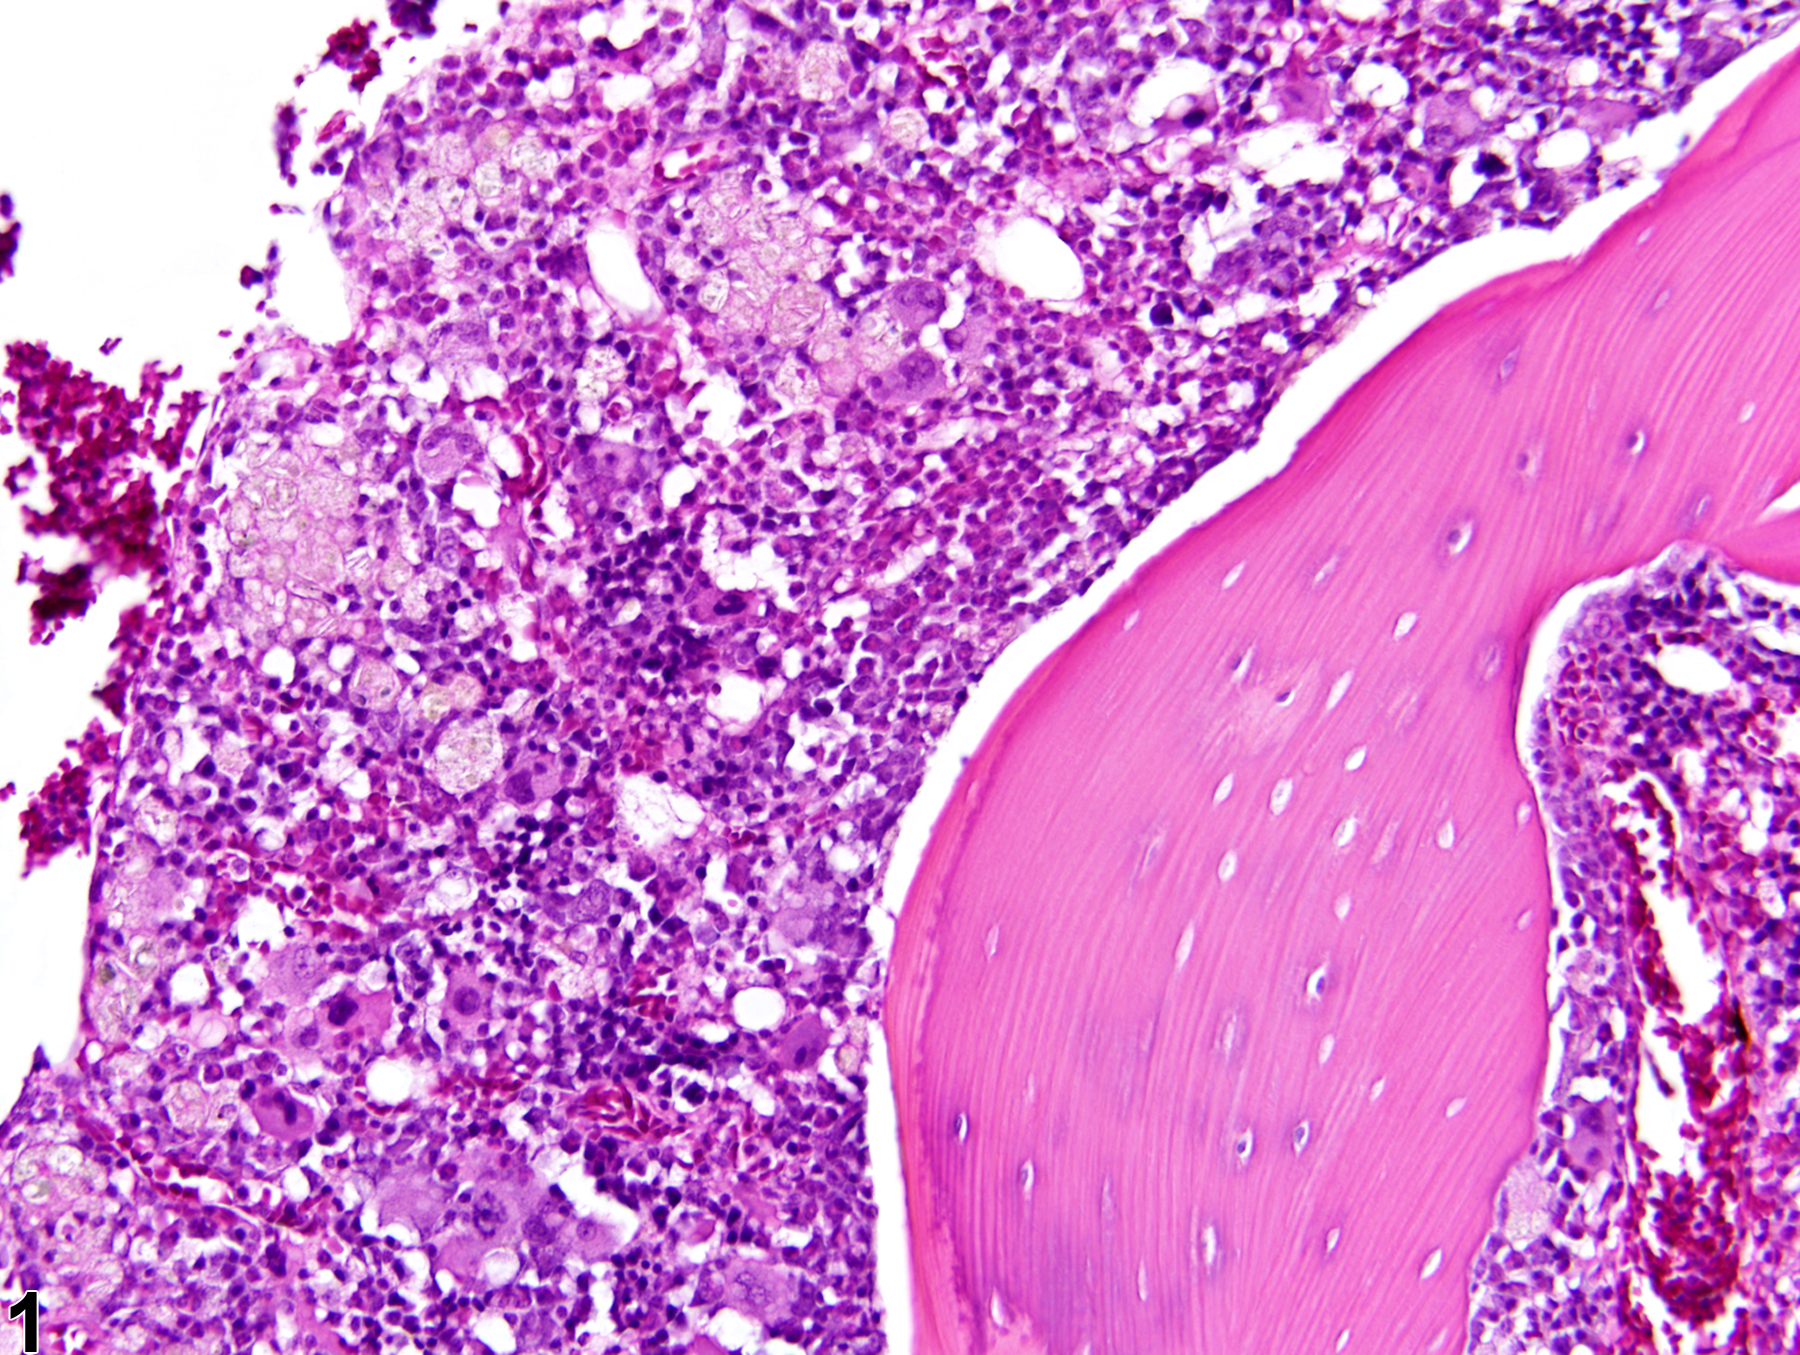 Image of infiltration cellular, histiocyte in the bone marrow from a female F344/N rat in a 2 year study